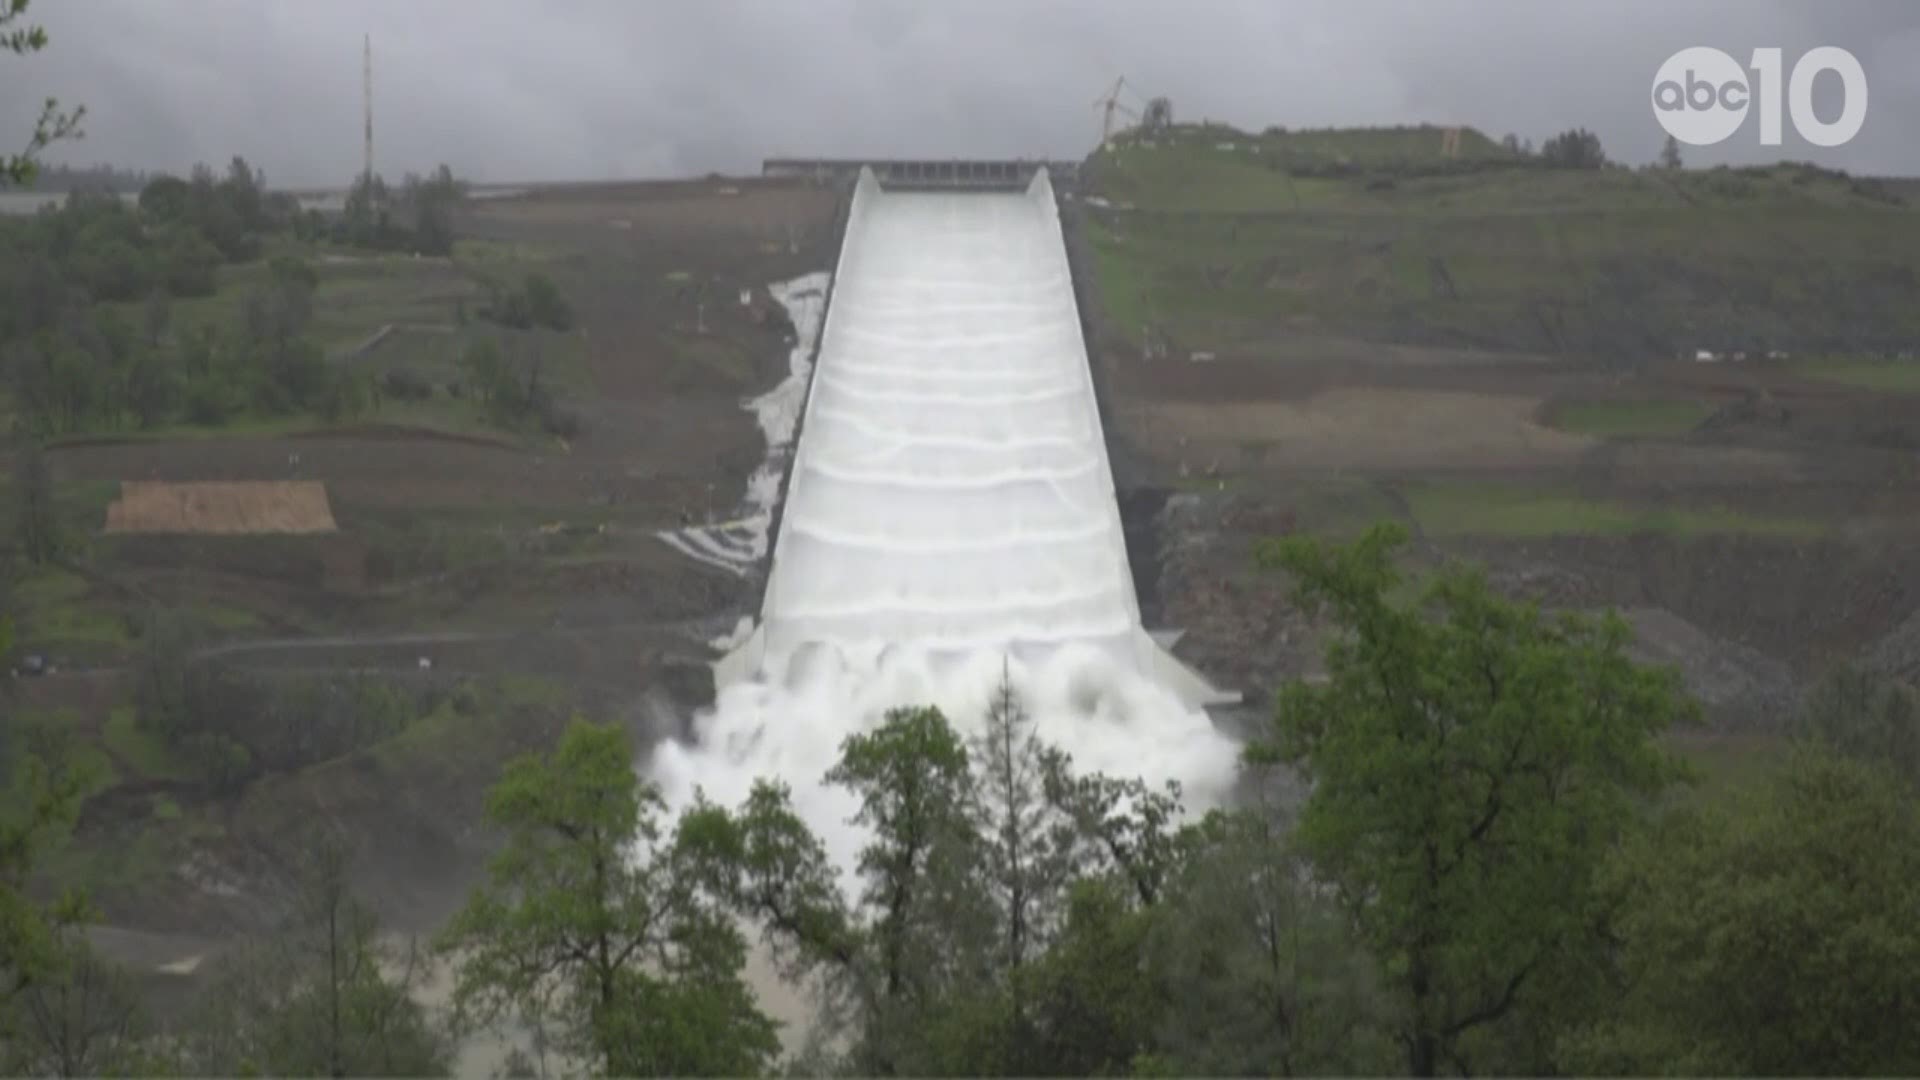 Water is flowing down the rebuilt spillway of the nation's tallest dam for the first time since it crumbled two years ago and threatened to flood California communities.

The opening of the Spillway comes as spring storms are expected to swell the lake behind Oroville Dam this week.